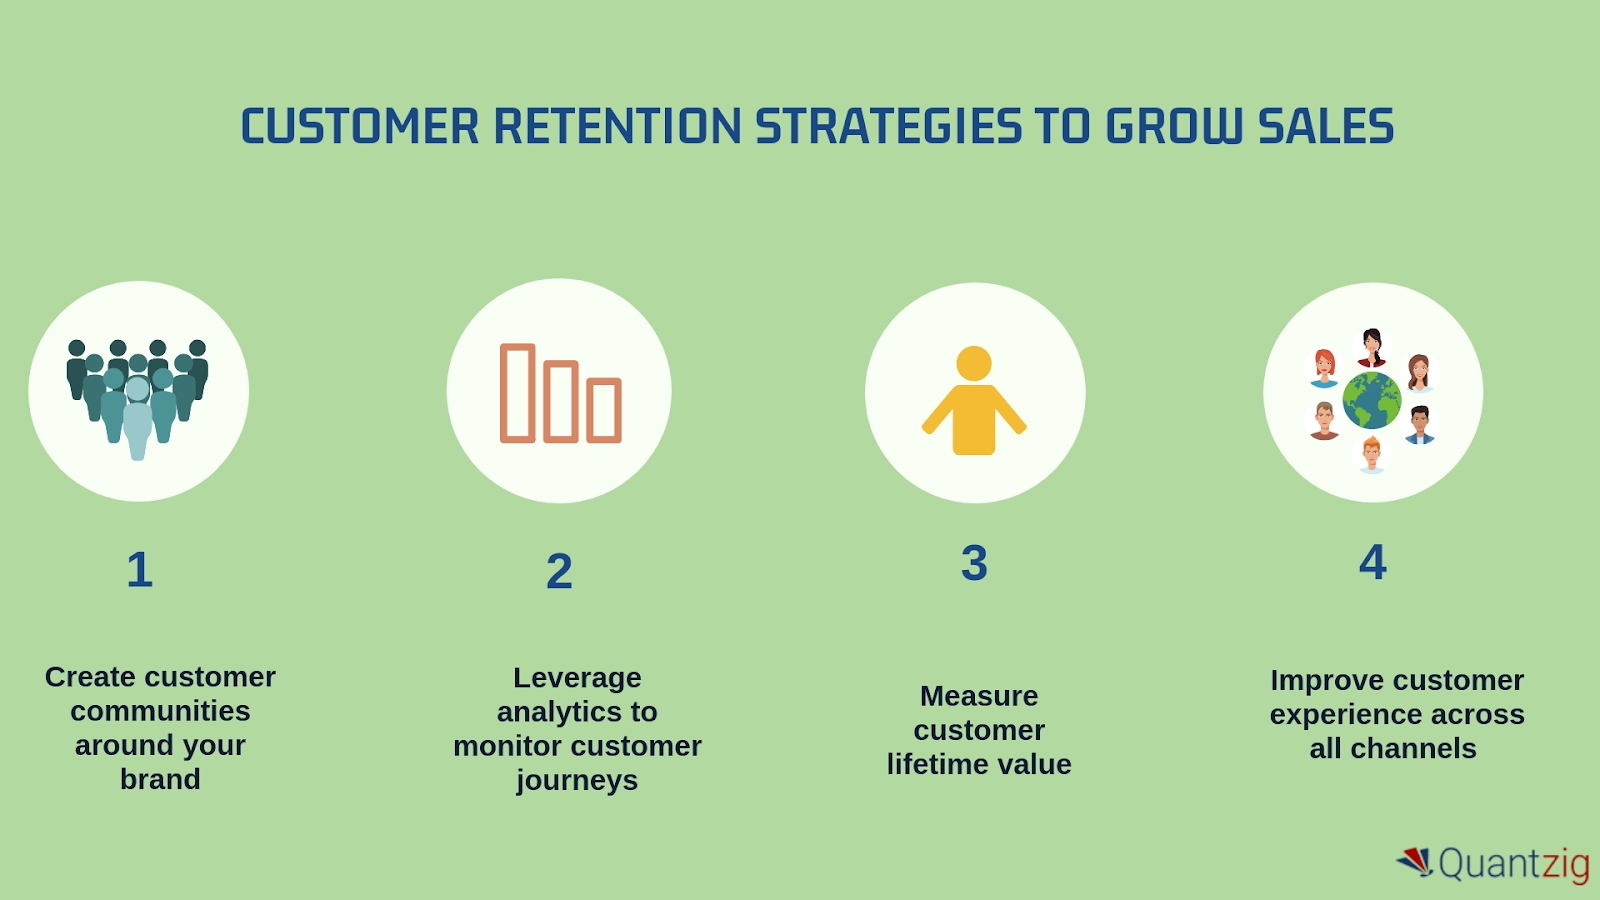 Focus on Customer Experience and Retention